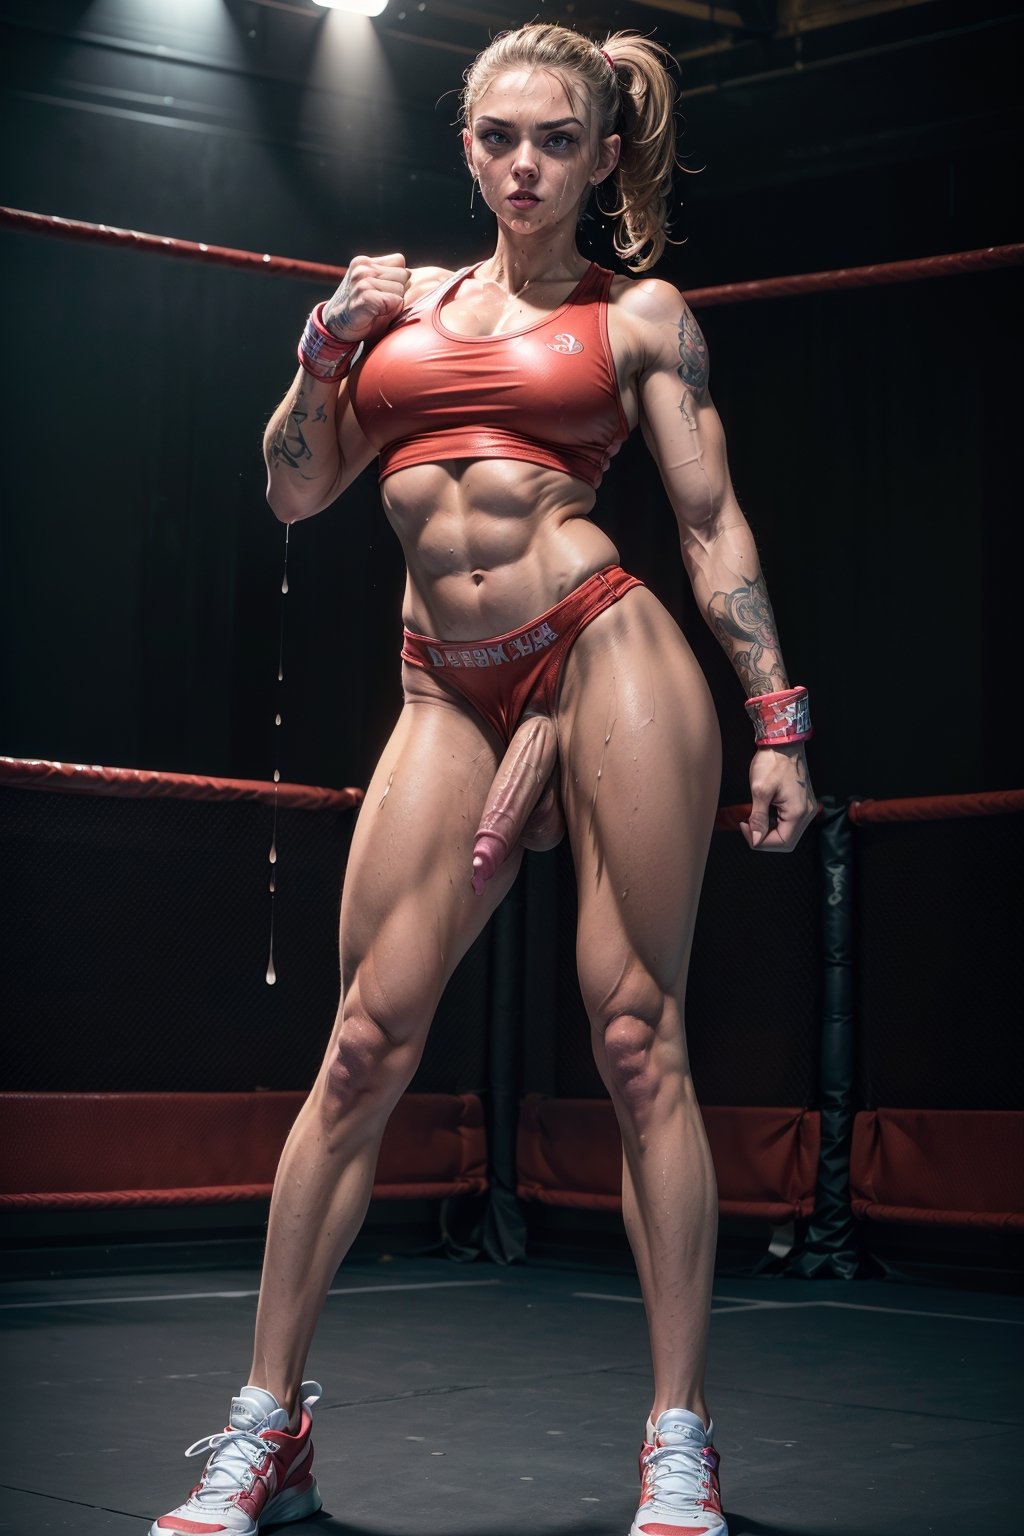 Determined female boxer, Sweat on her brow, Strong, focused gaze, Tattooed arms, Lean and muscular physique, Short, slicked-back hair, Sleeveless sports bra, Red hand wraps, Boxing shoes, Intense training atmosphere, Ring ropes in the background, 35mm film aesthetic, Athletic power 

detailed huge penis (flaccid, super detailed, realistic, detailed penile head , (only one), big size)), (penis dripping cum:1.4), testicles, (huge penis:1.5), feminine body, feminine arms, thin arms,

(Full body portait:1.5),

